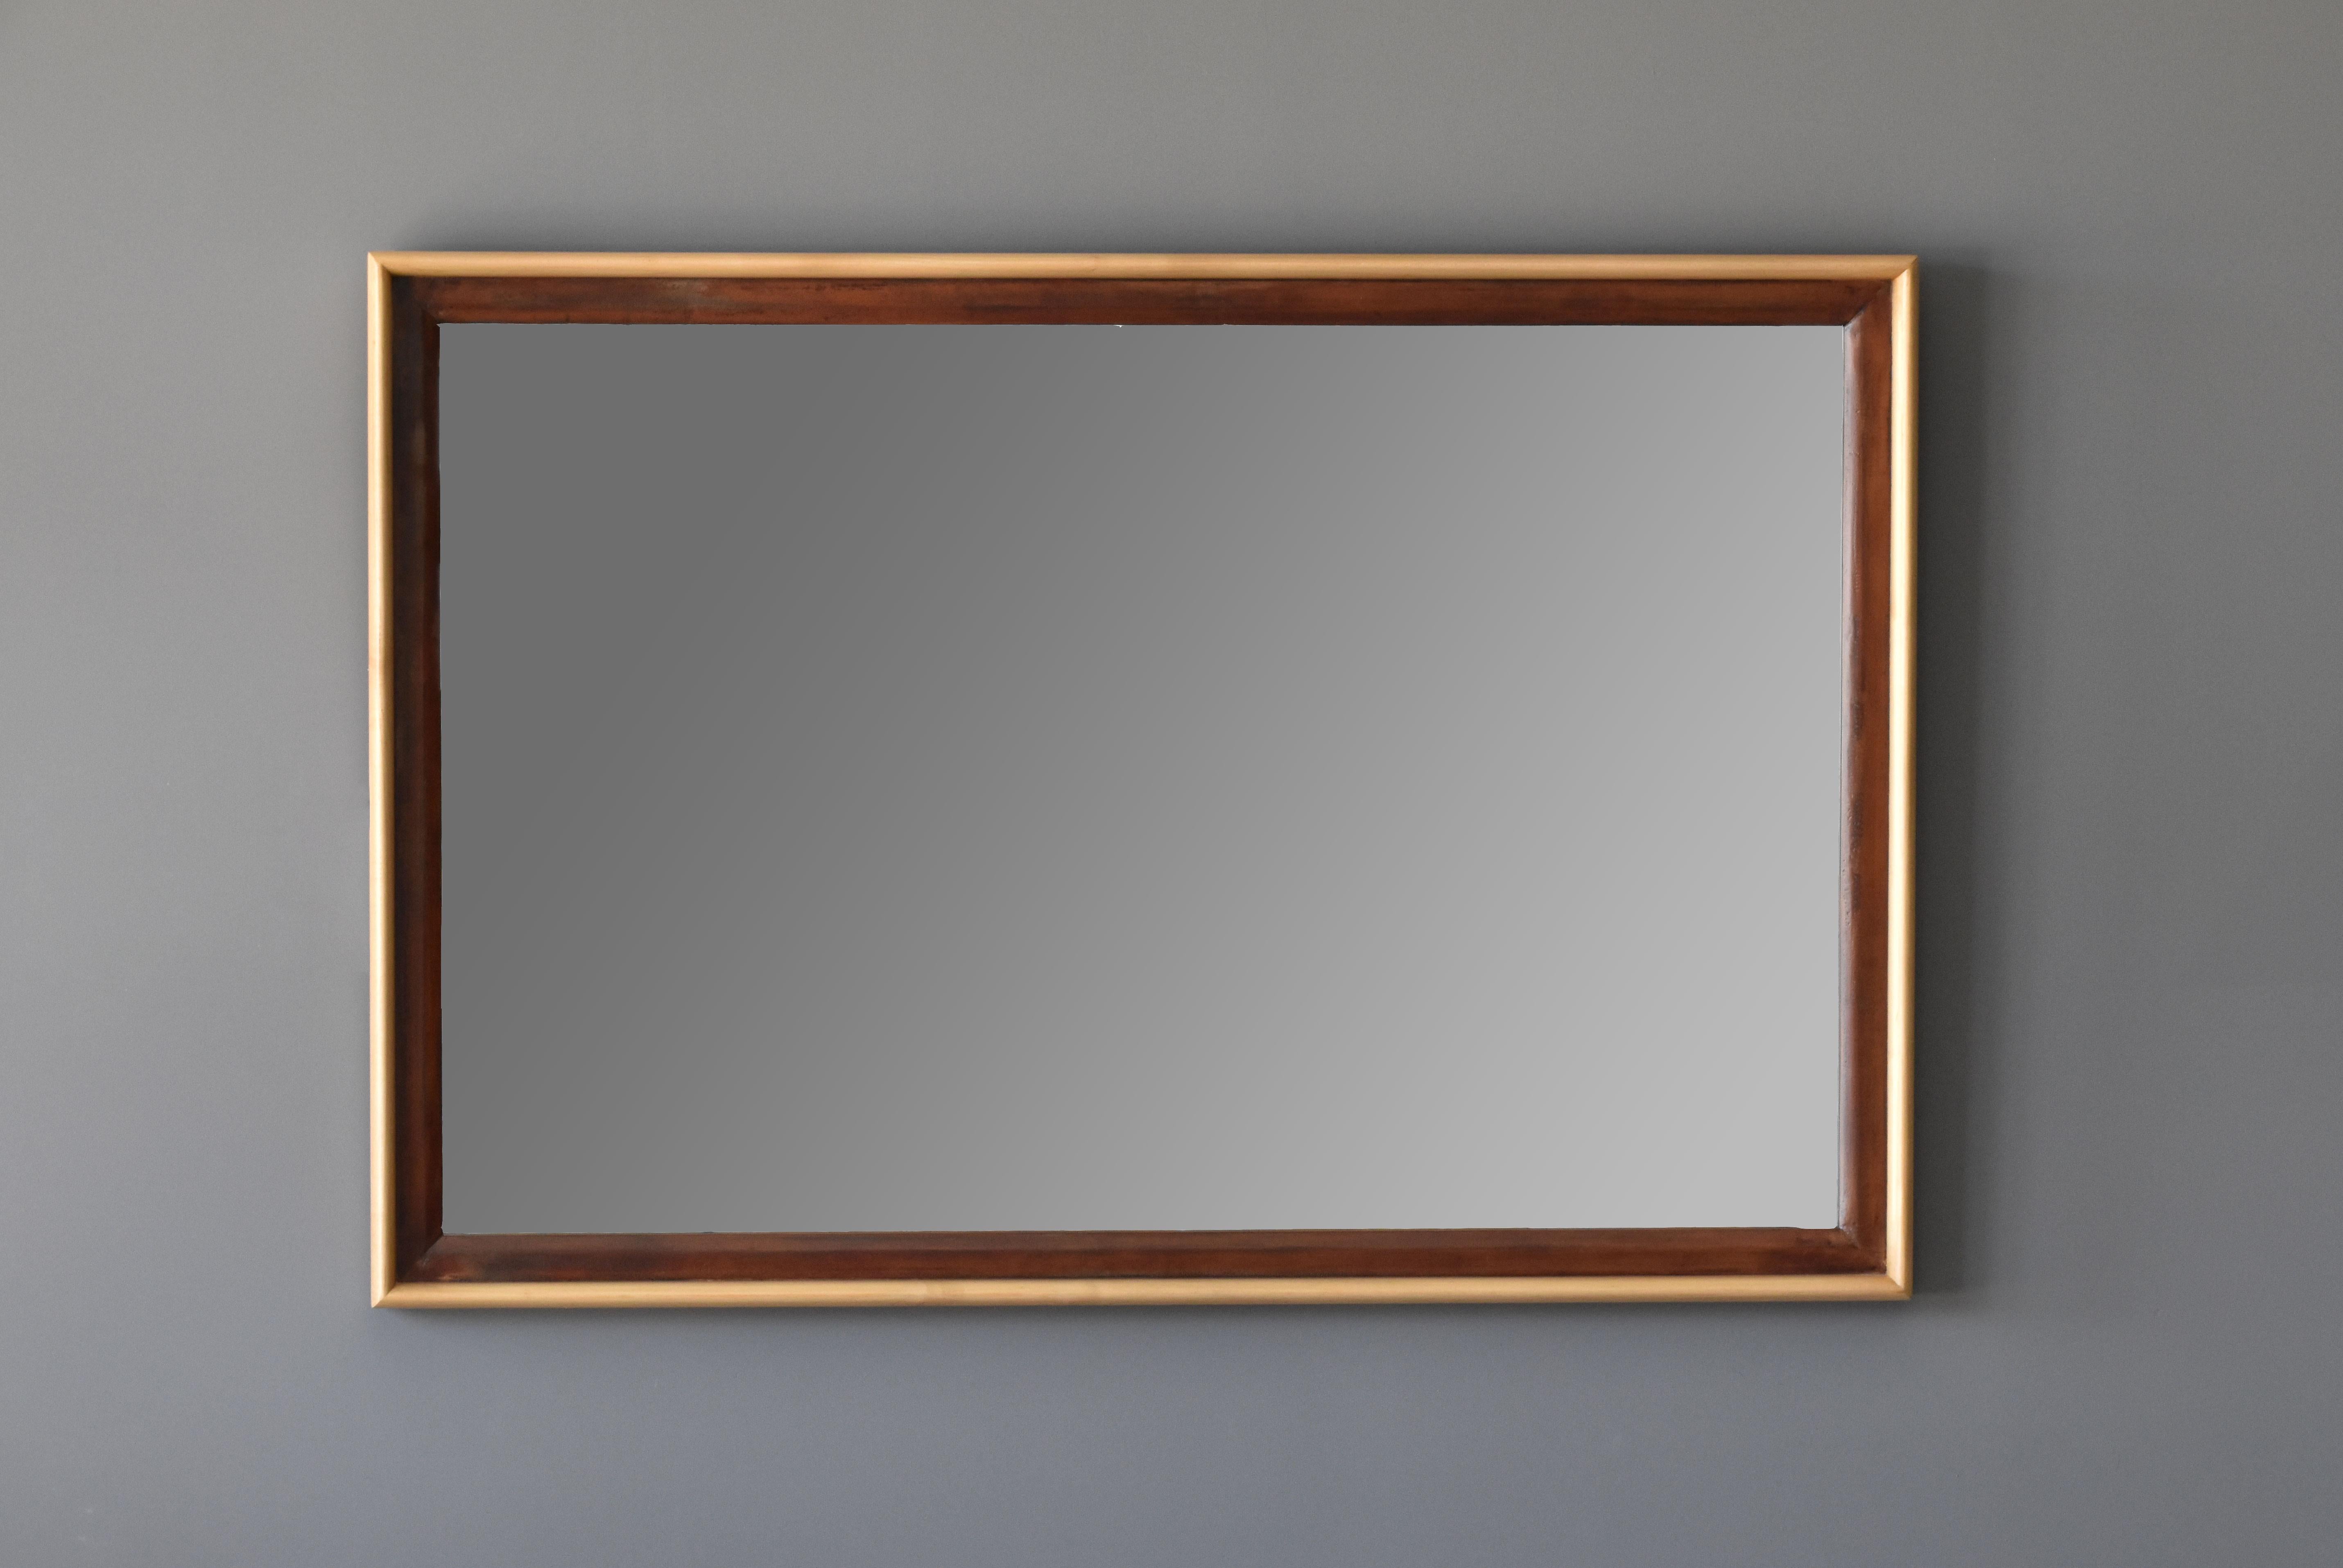 A rare and large mirror from Paul Frankl's iconic 